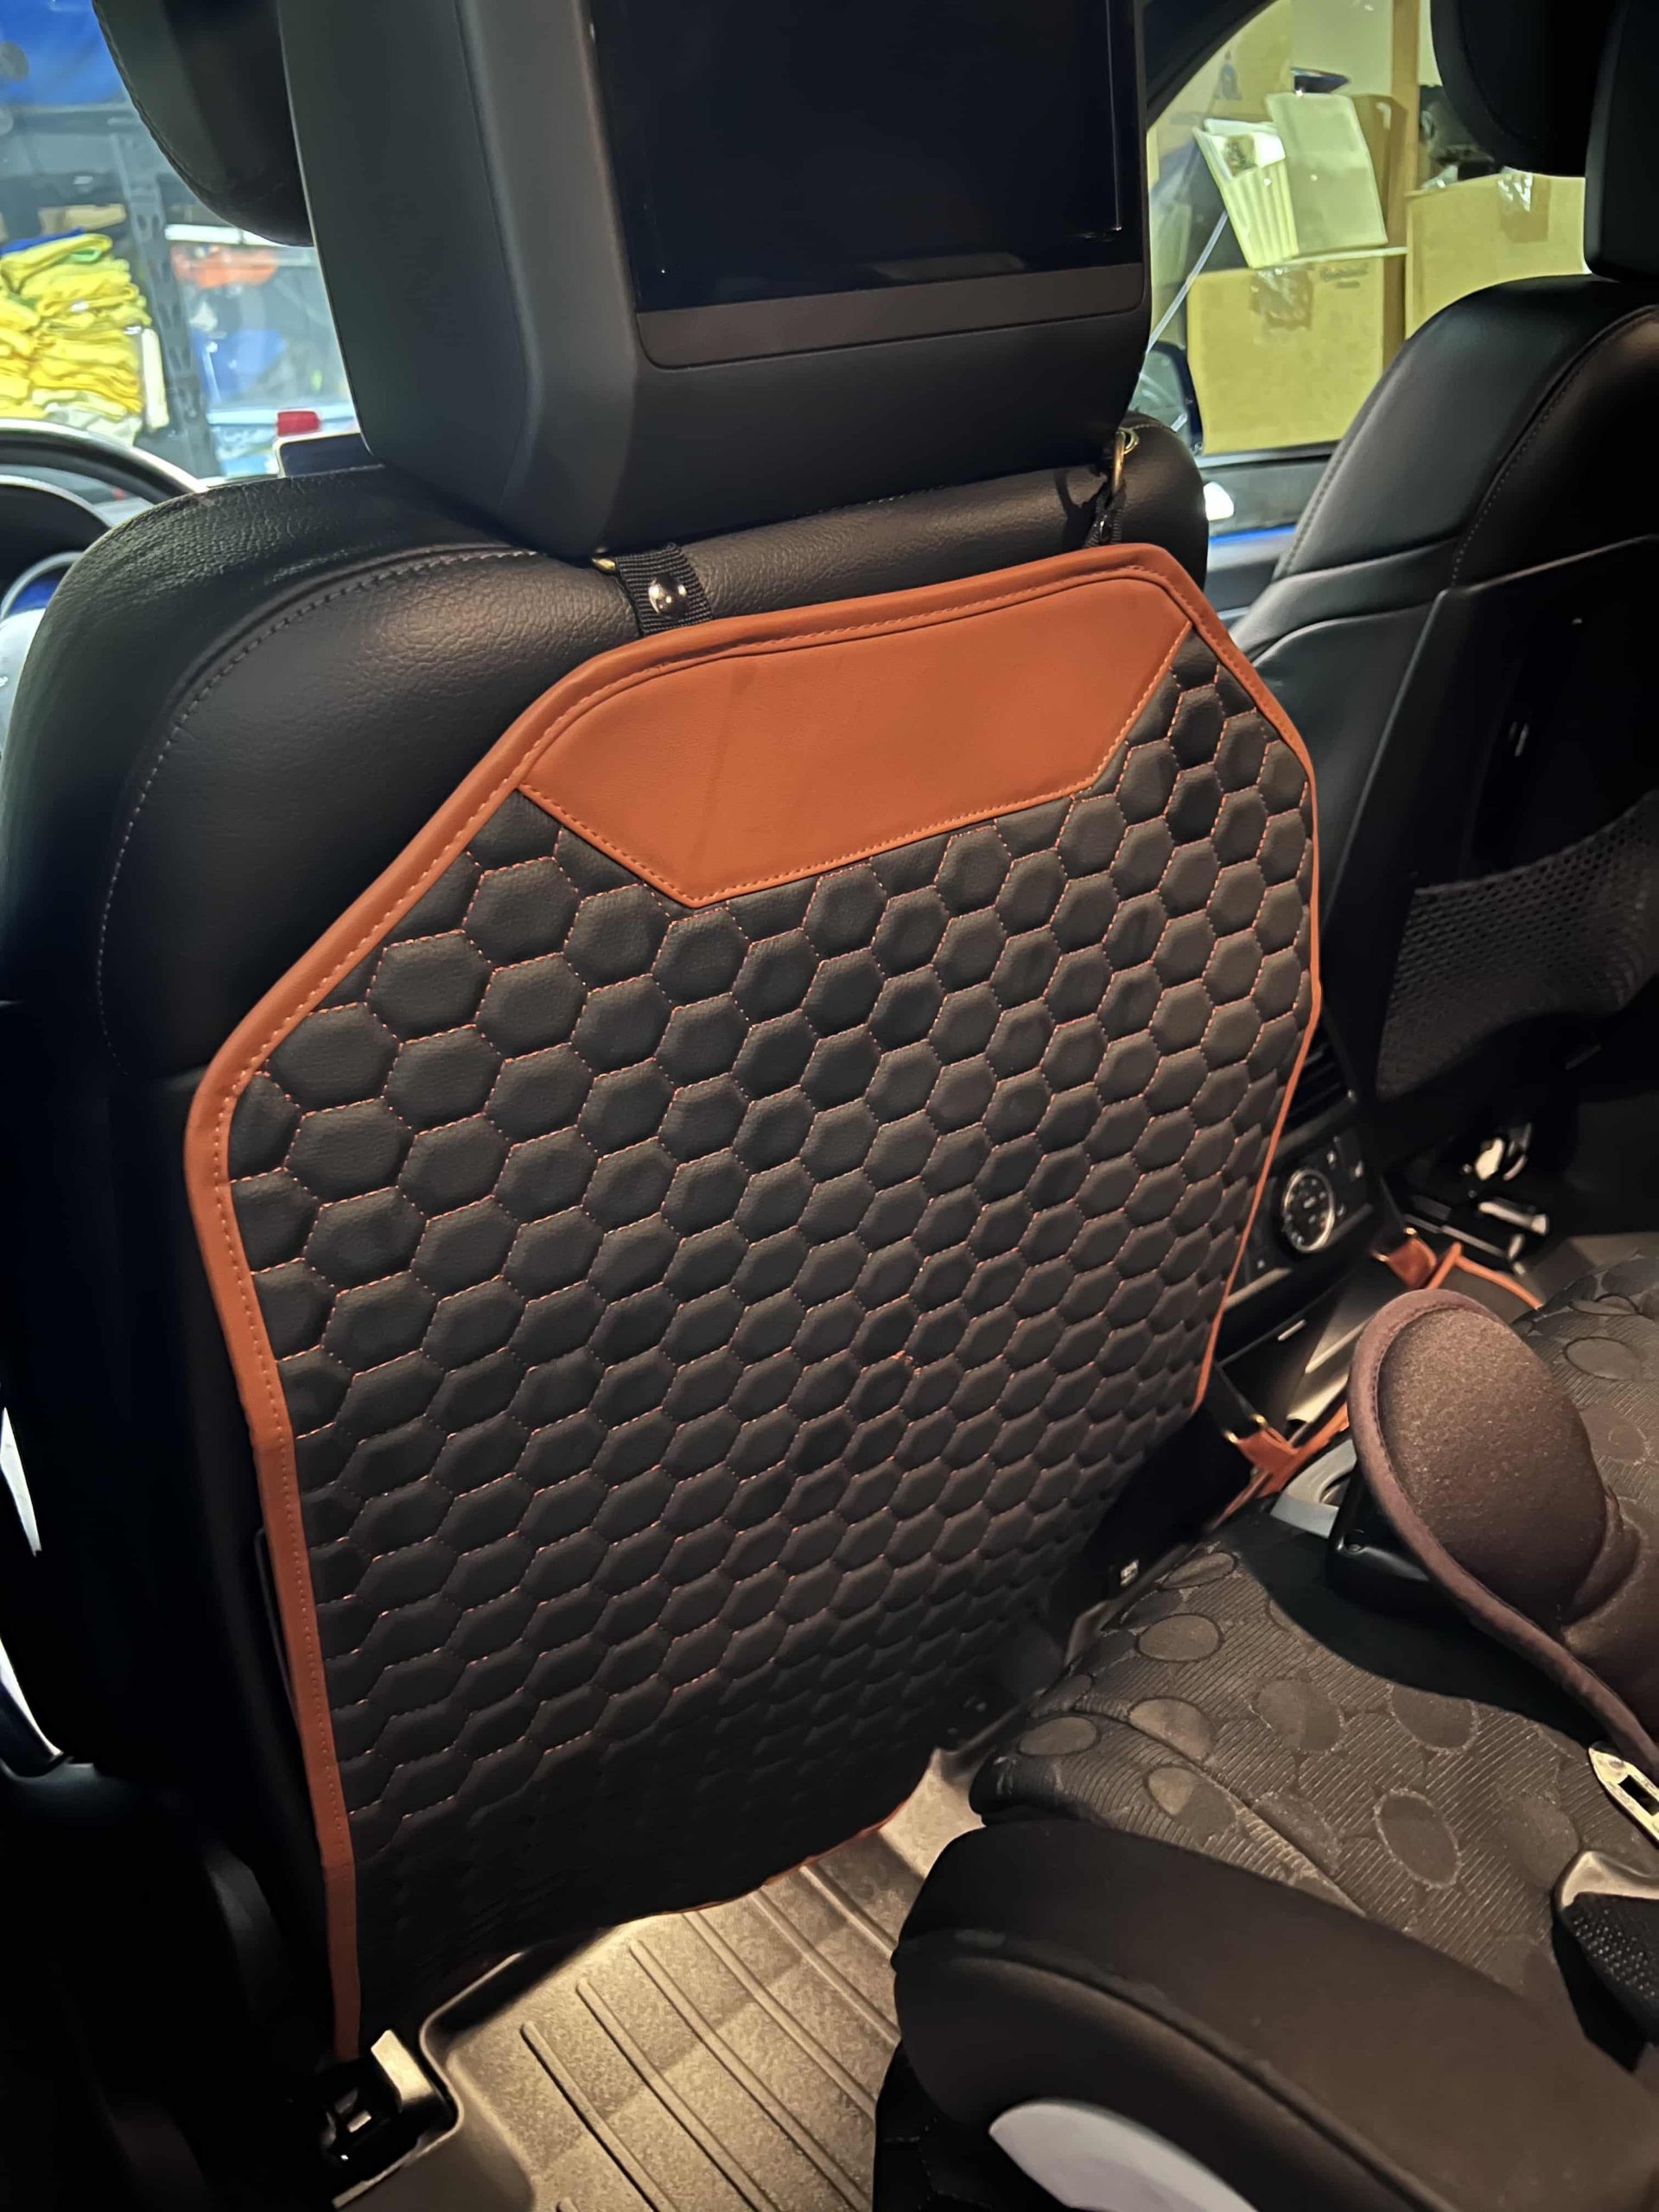 Protecting Your Car Seats from Kids